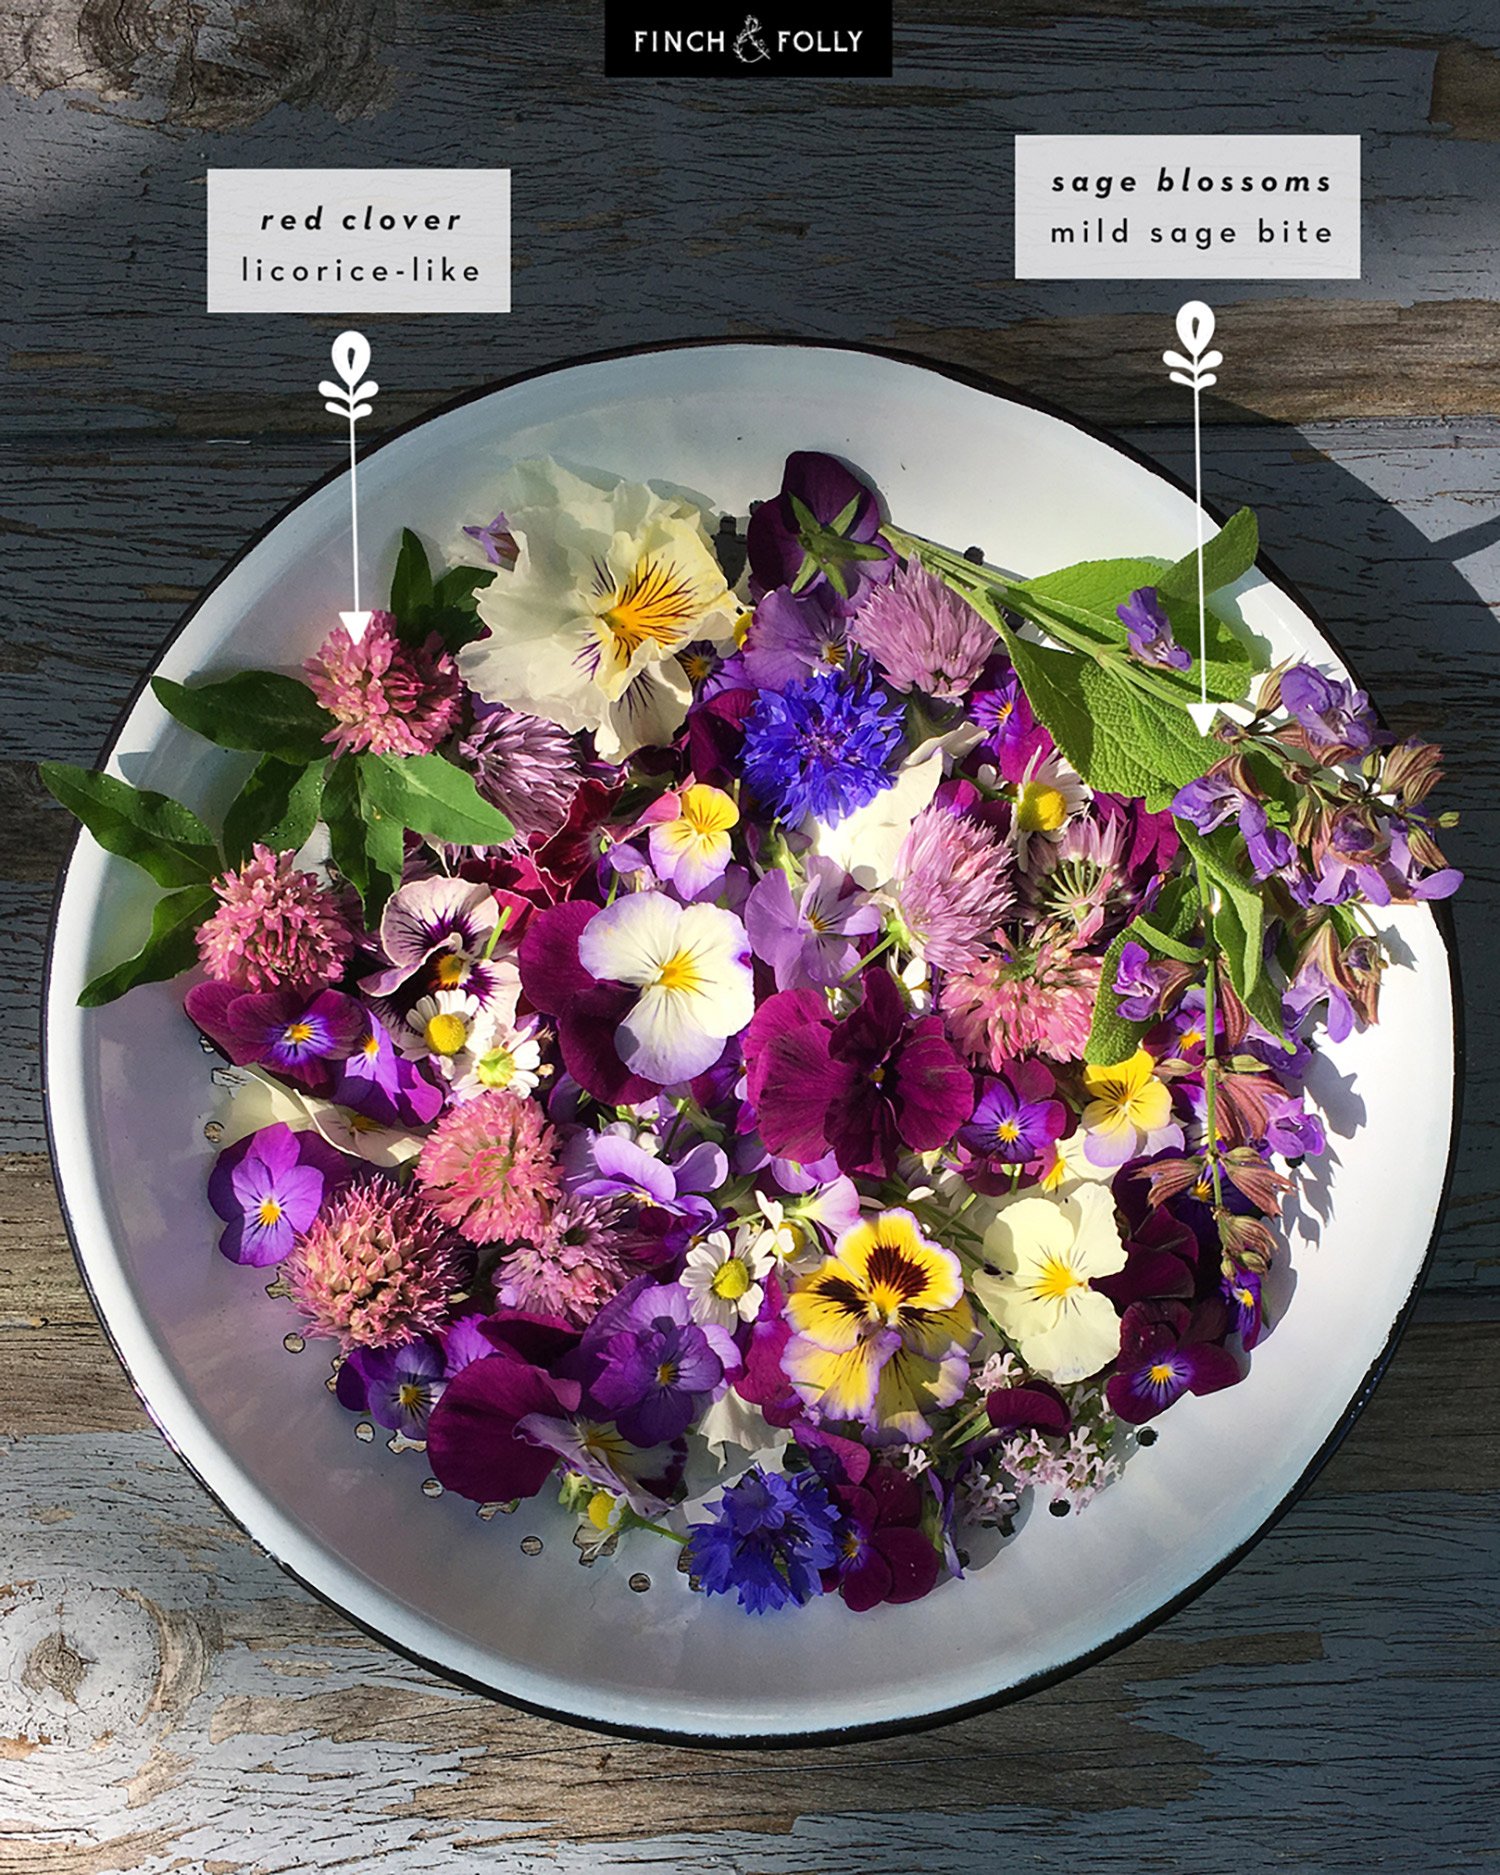 Finch + Folly — Edible Flowers: What they Taste Like & How to Use